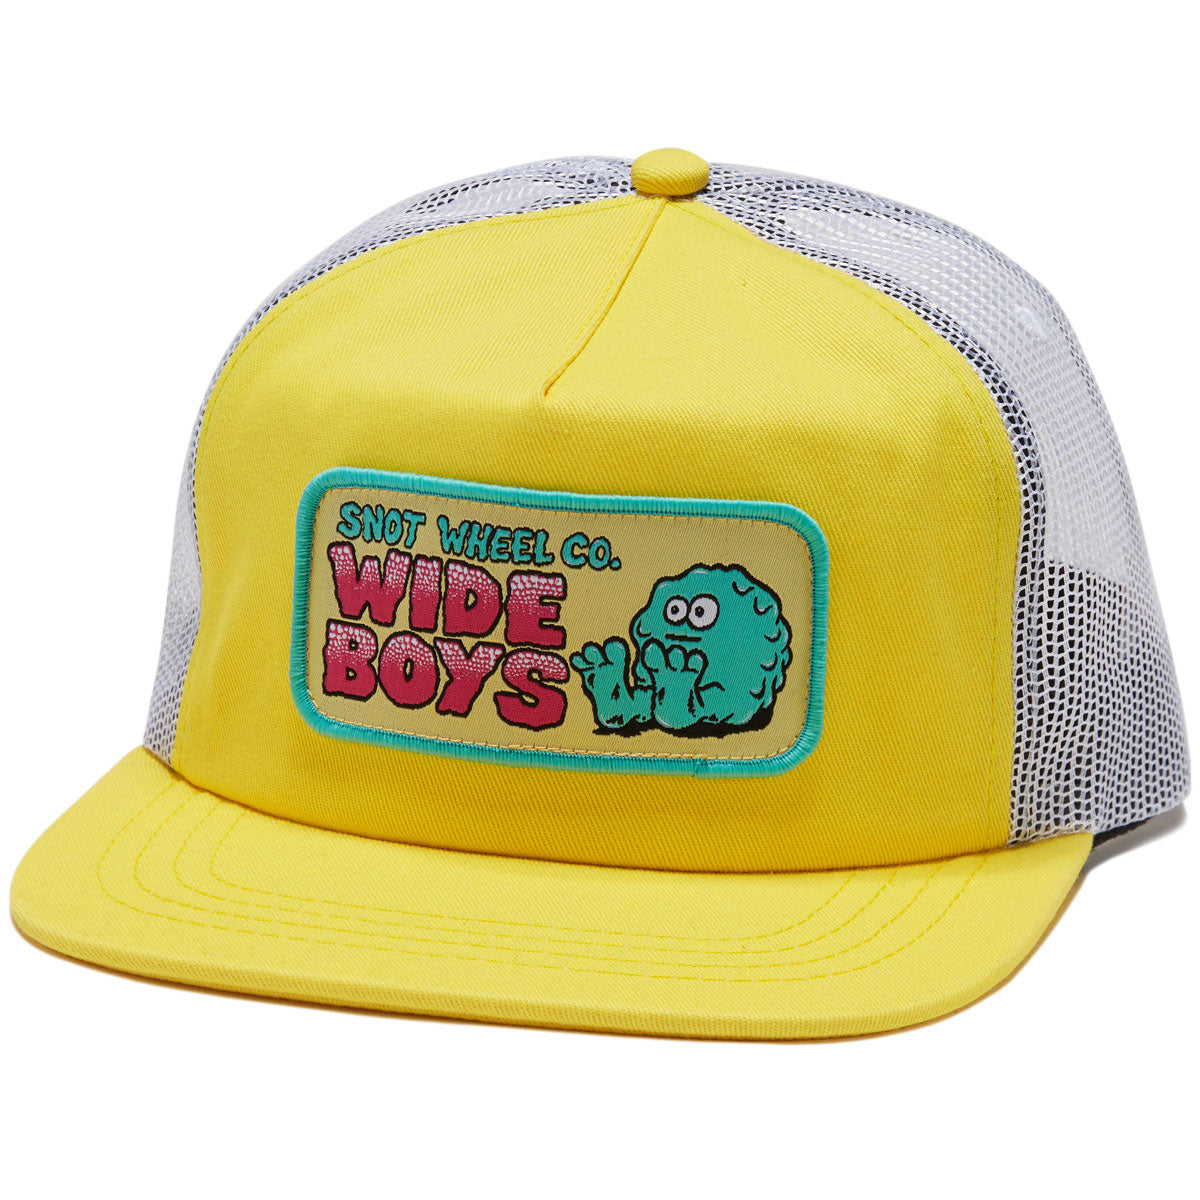 Snot Wide Boy Classic Trucker Hat - Yellow image 1